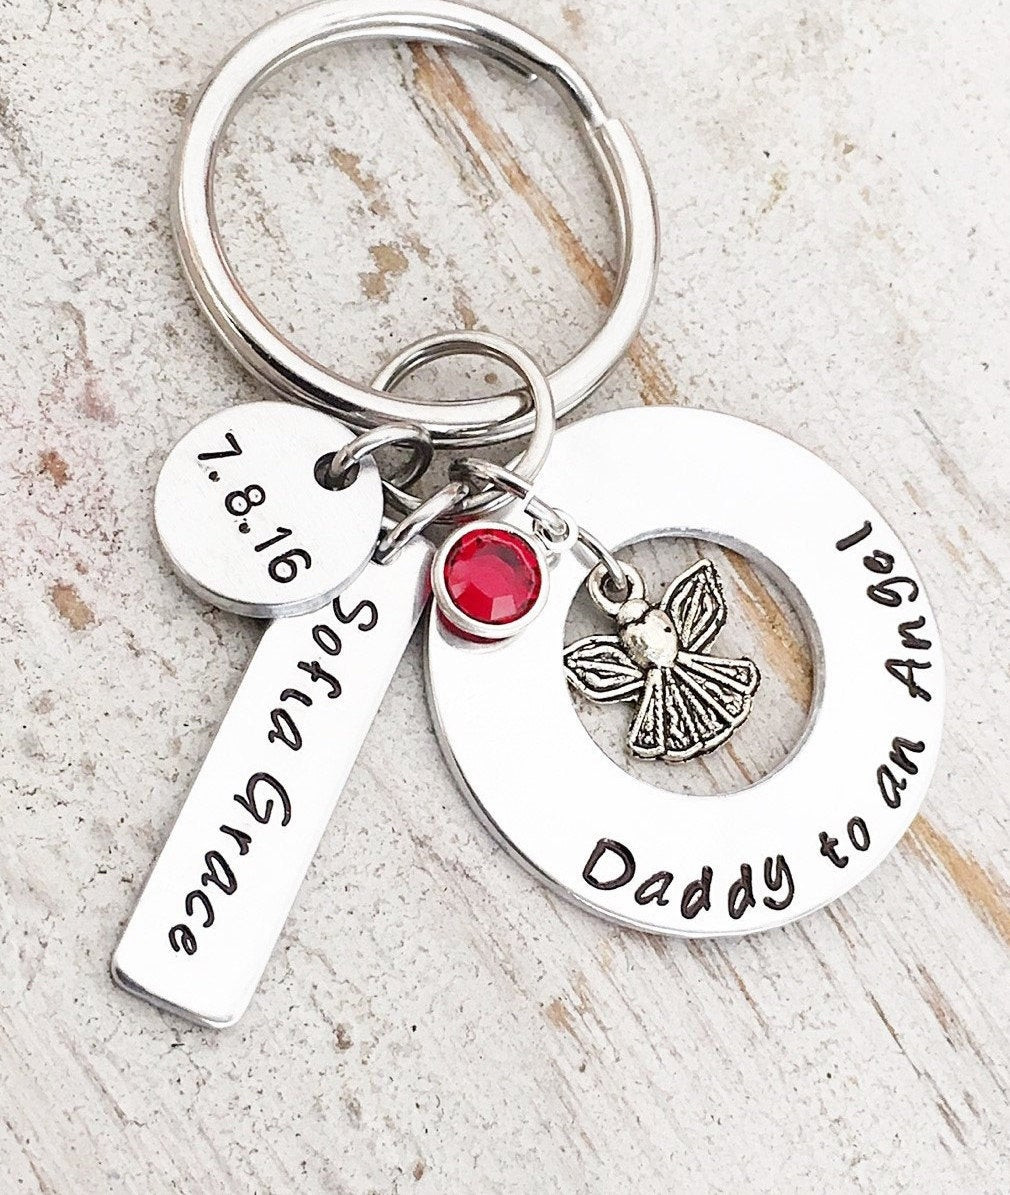 Memorial Gift Ideas For Loss Of Father
 Sympathy Gift for Dad Loss of a Child Gift Infant Loss